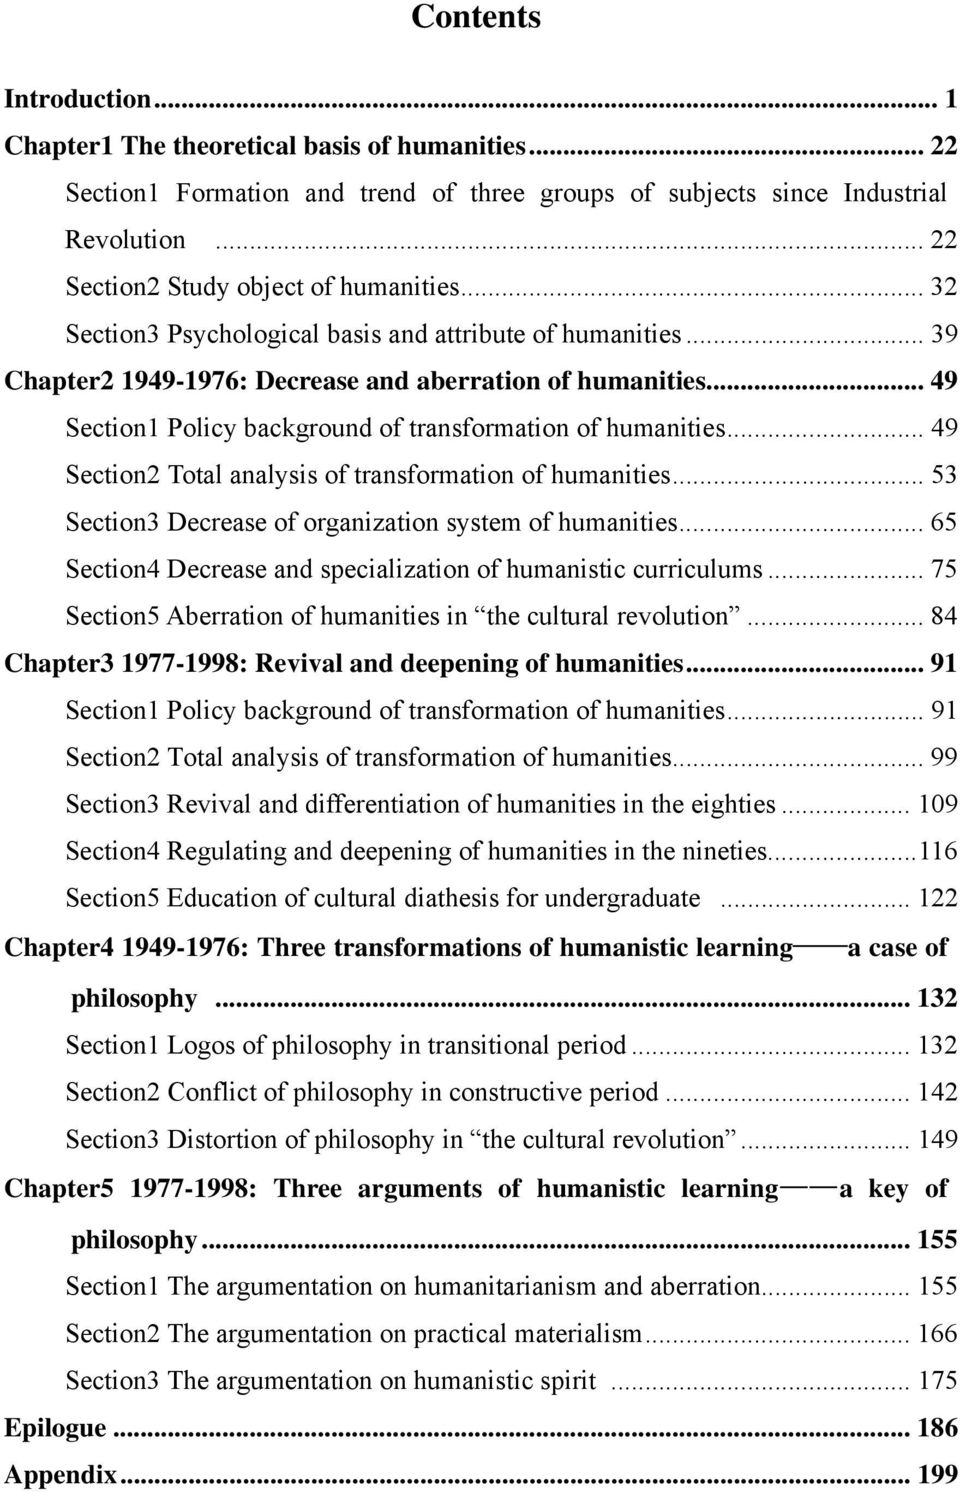 .. 49 Section2 Total analysis of transformation of humanities... 53 Section3 Decrease of organization system of humanities... 65 Section4 Decrease and specialization of humanistic curriculums.